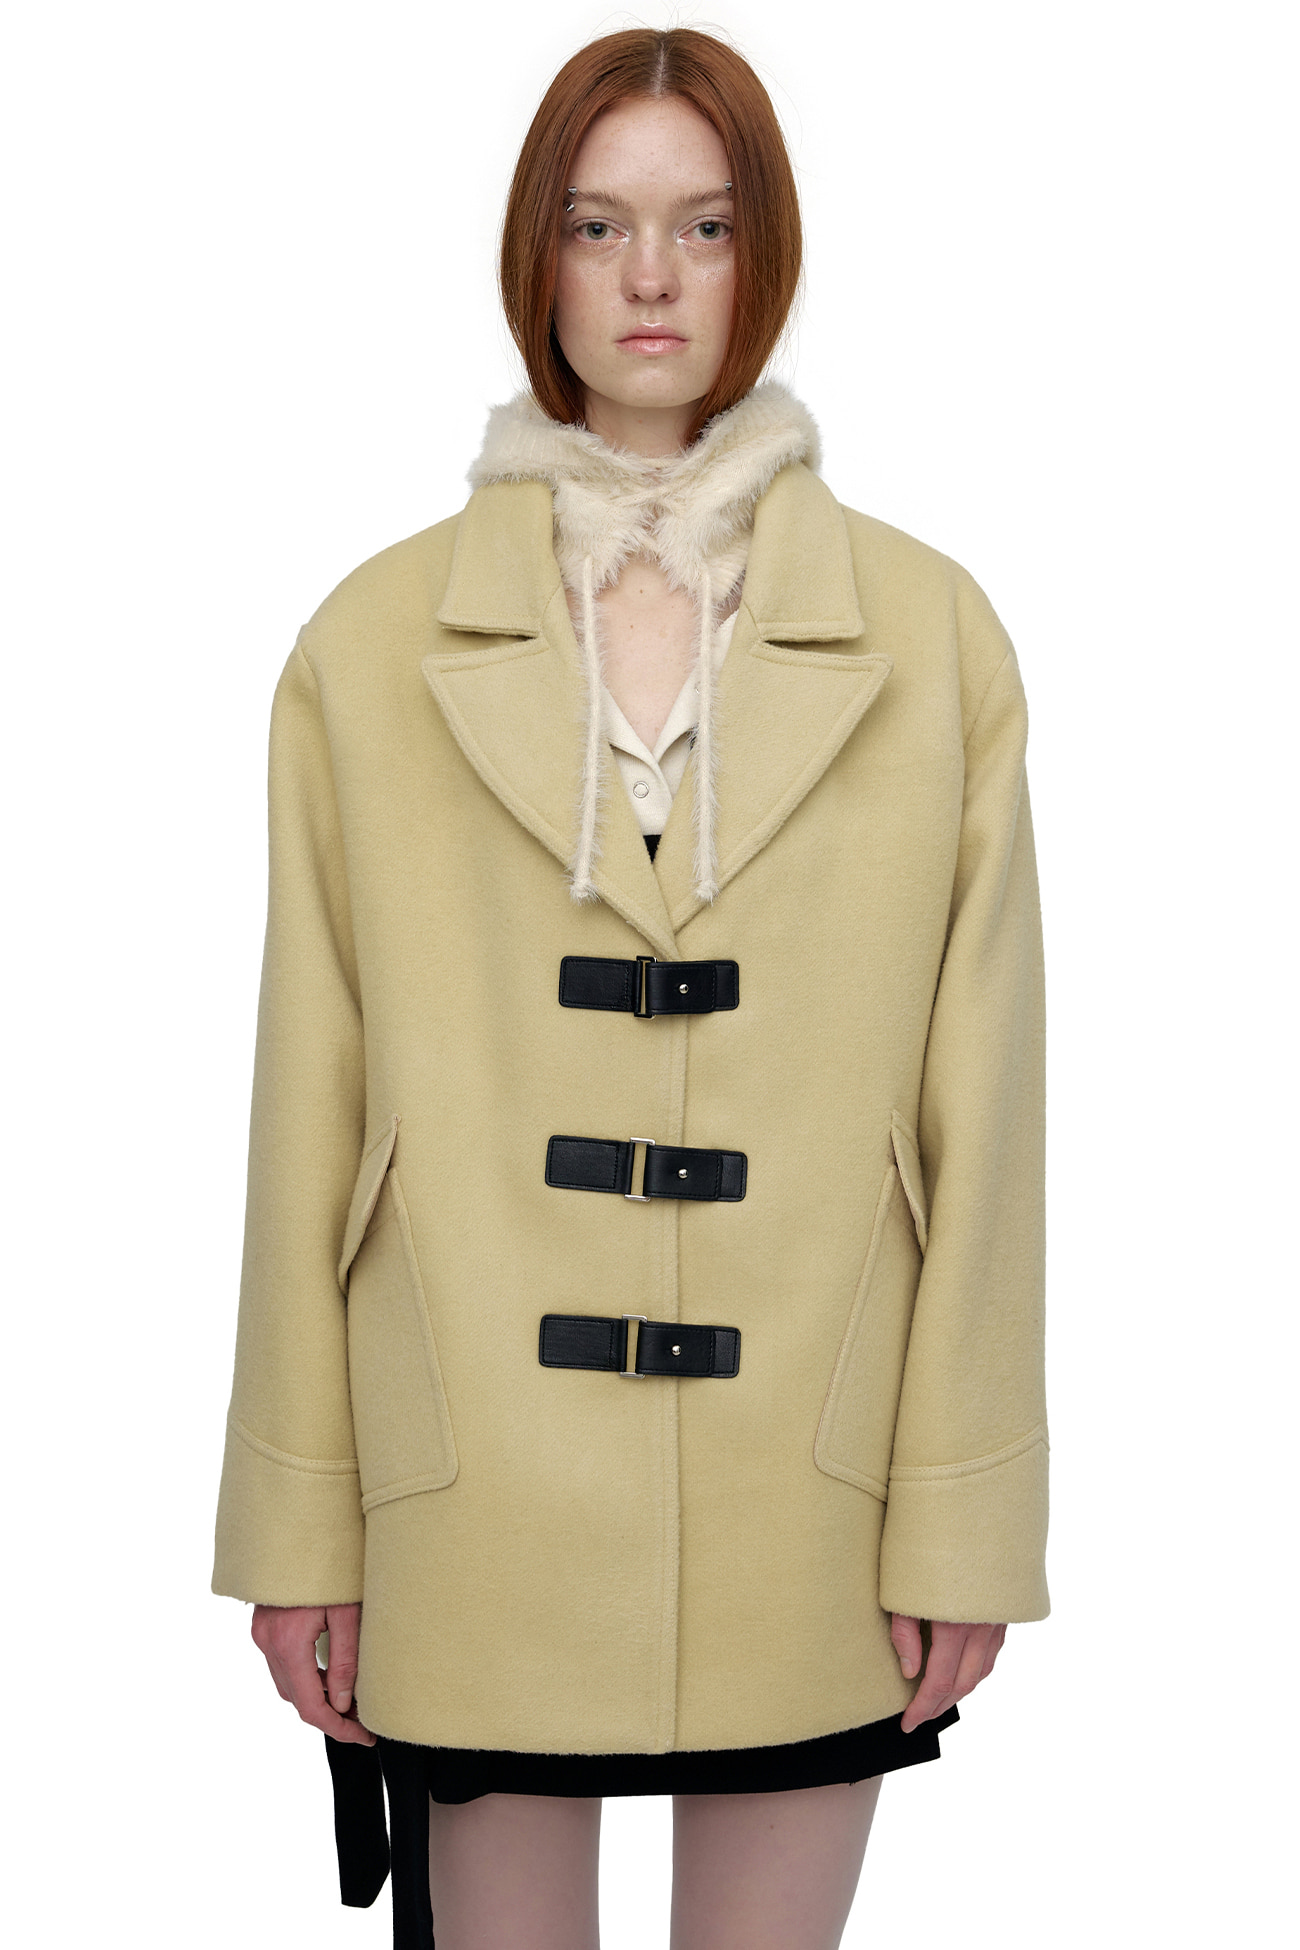 TAILOR COLLAR BELTED SINGLE COAT / YELLOW, 세릭